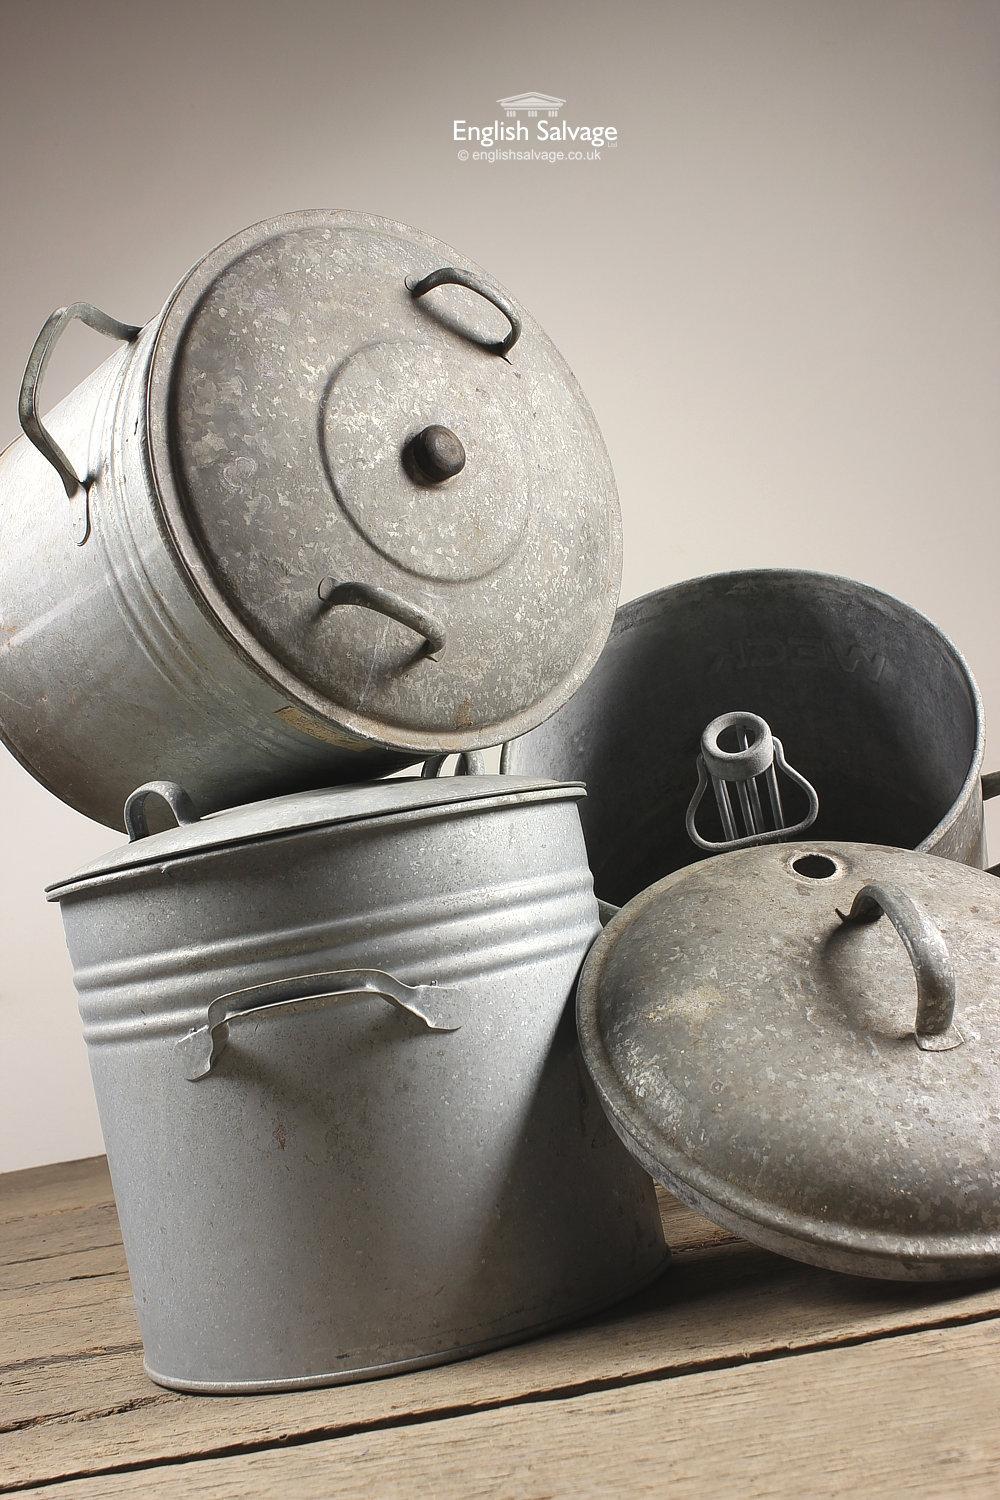 Five vintage Weck galvanised preserving pots/pans with lids. Two pots have inserts and one pot has central recess for storing thermometers. Ideal for use in the kitchen today, perhaps to store flour? or used as shop display items. One taller one